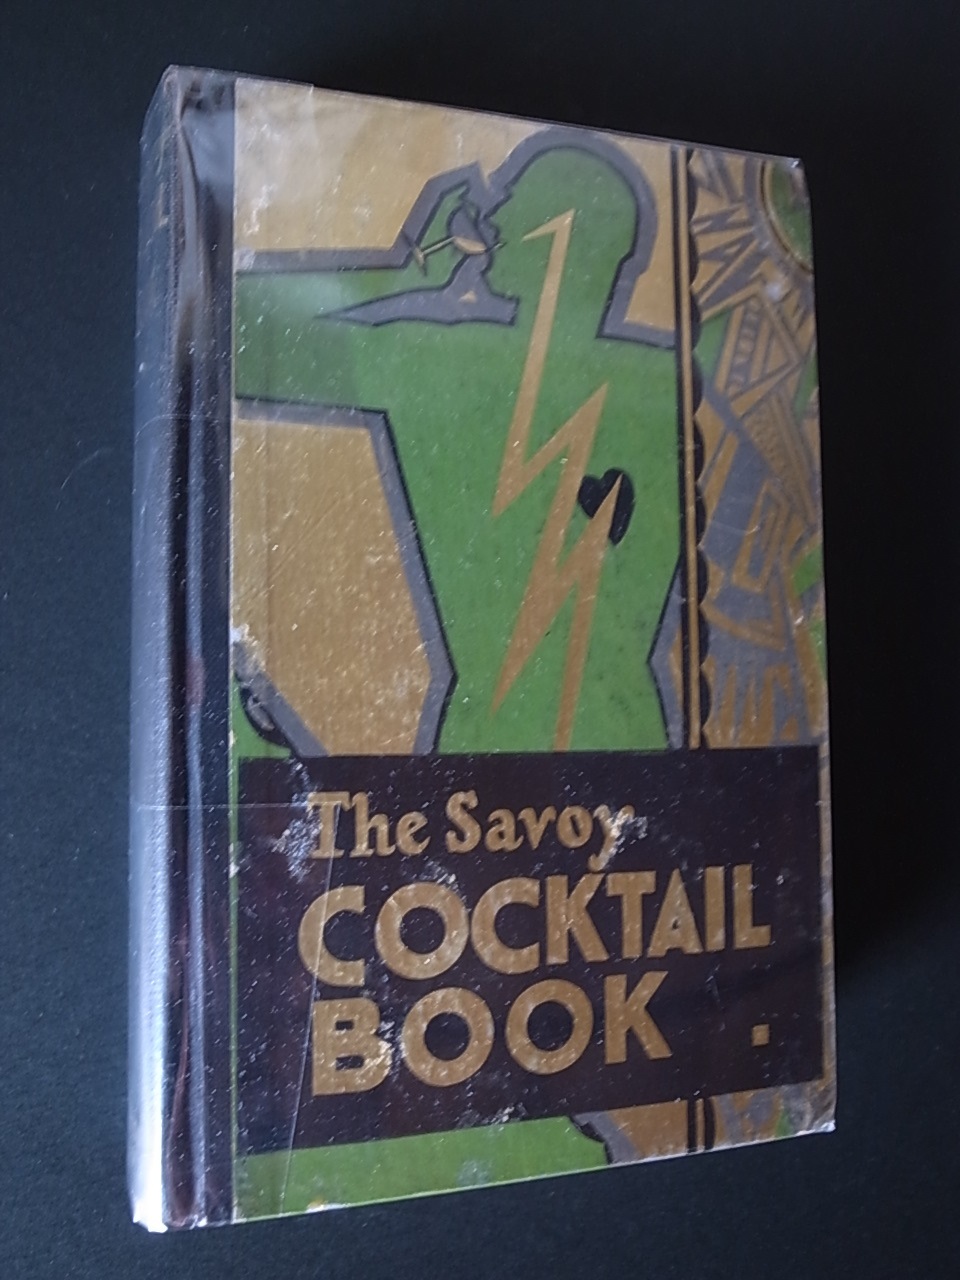 The Savoy Cocktail Book / Harry Craddock : Books & Things